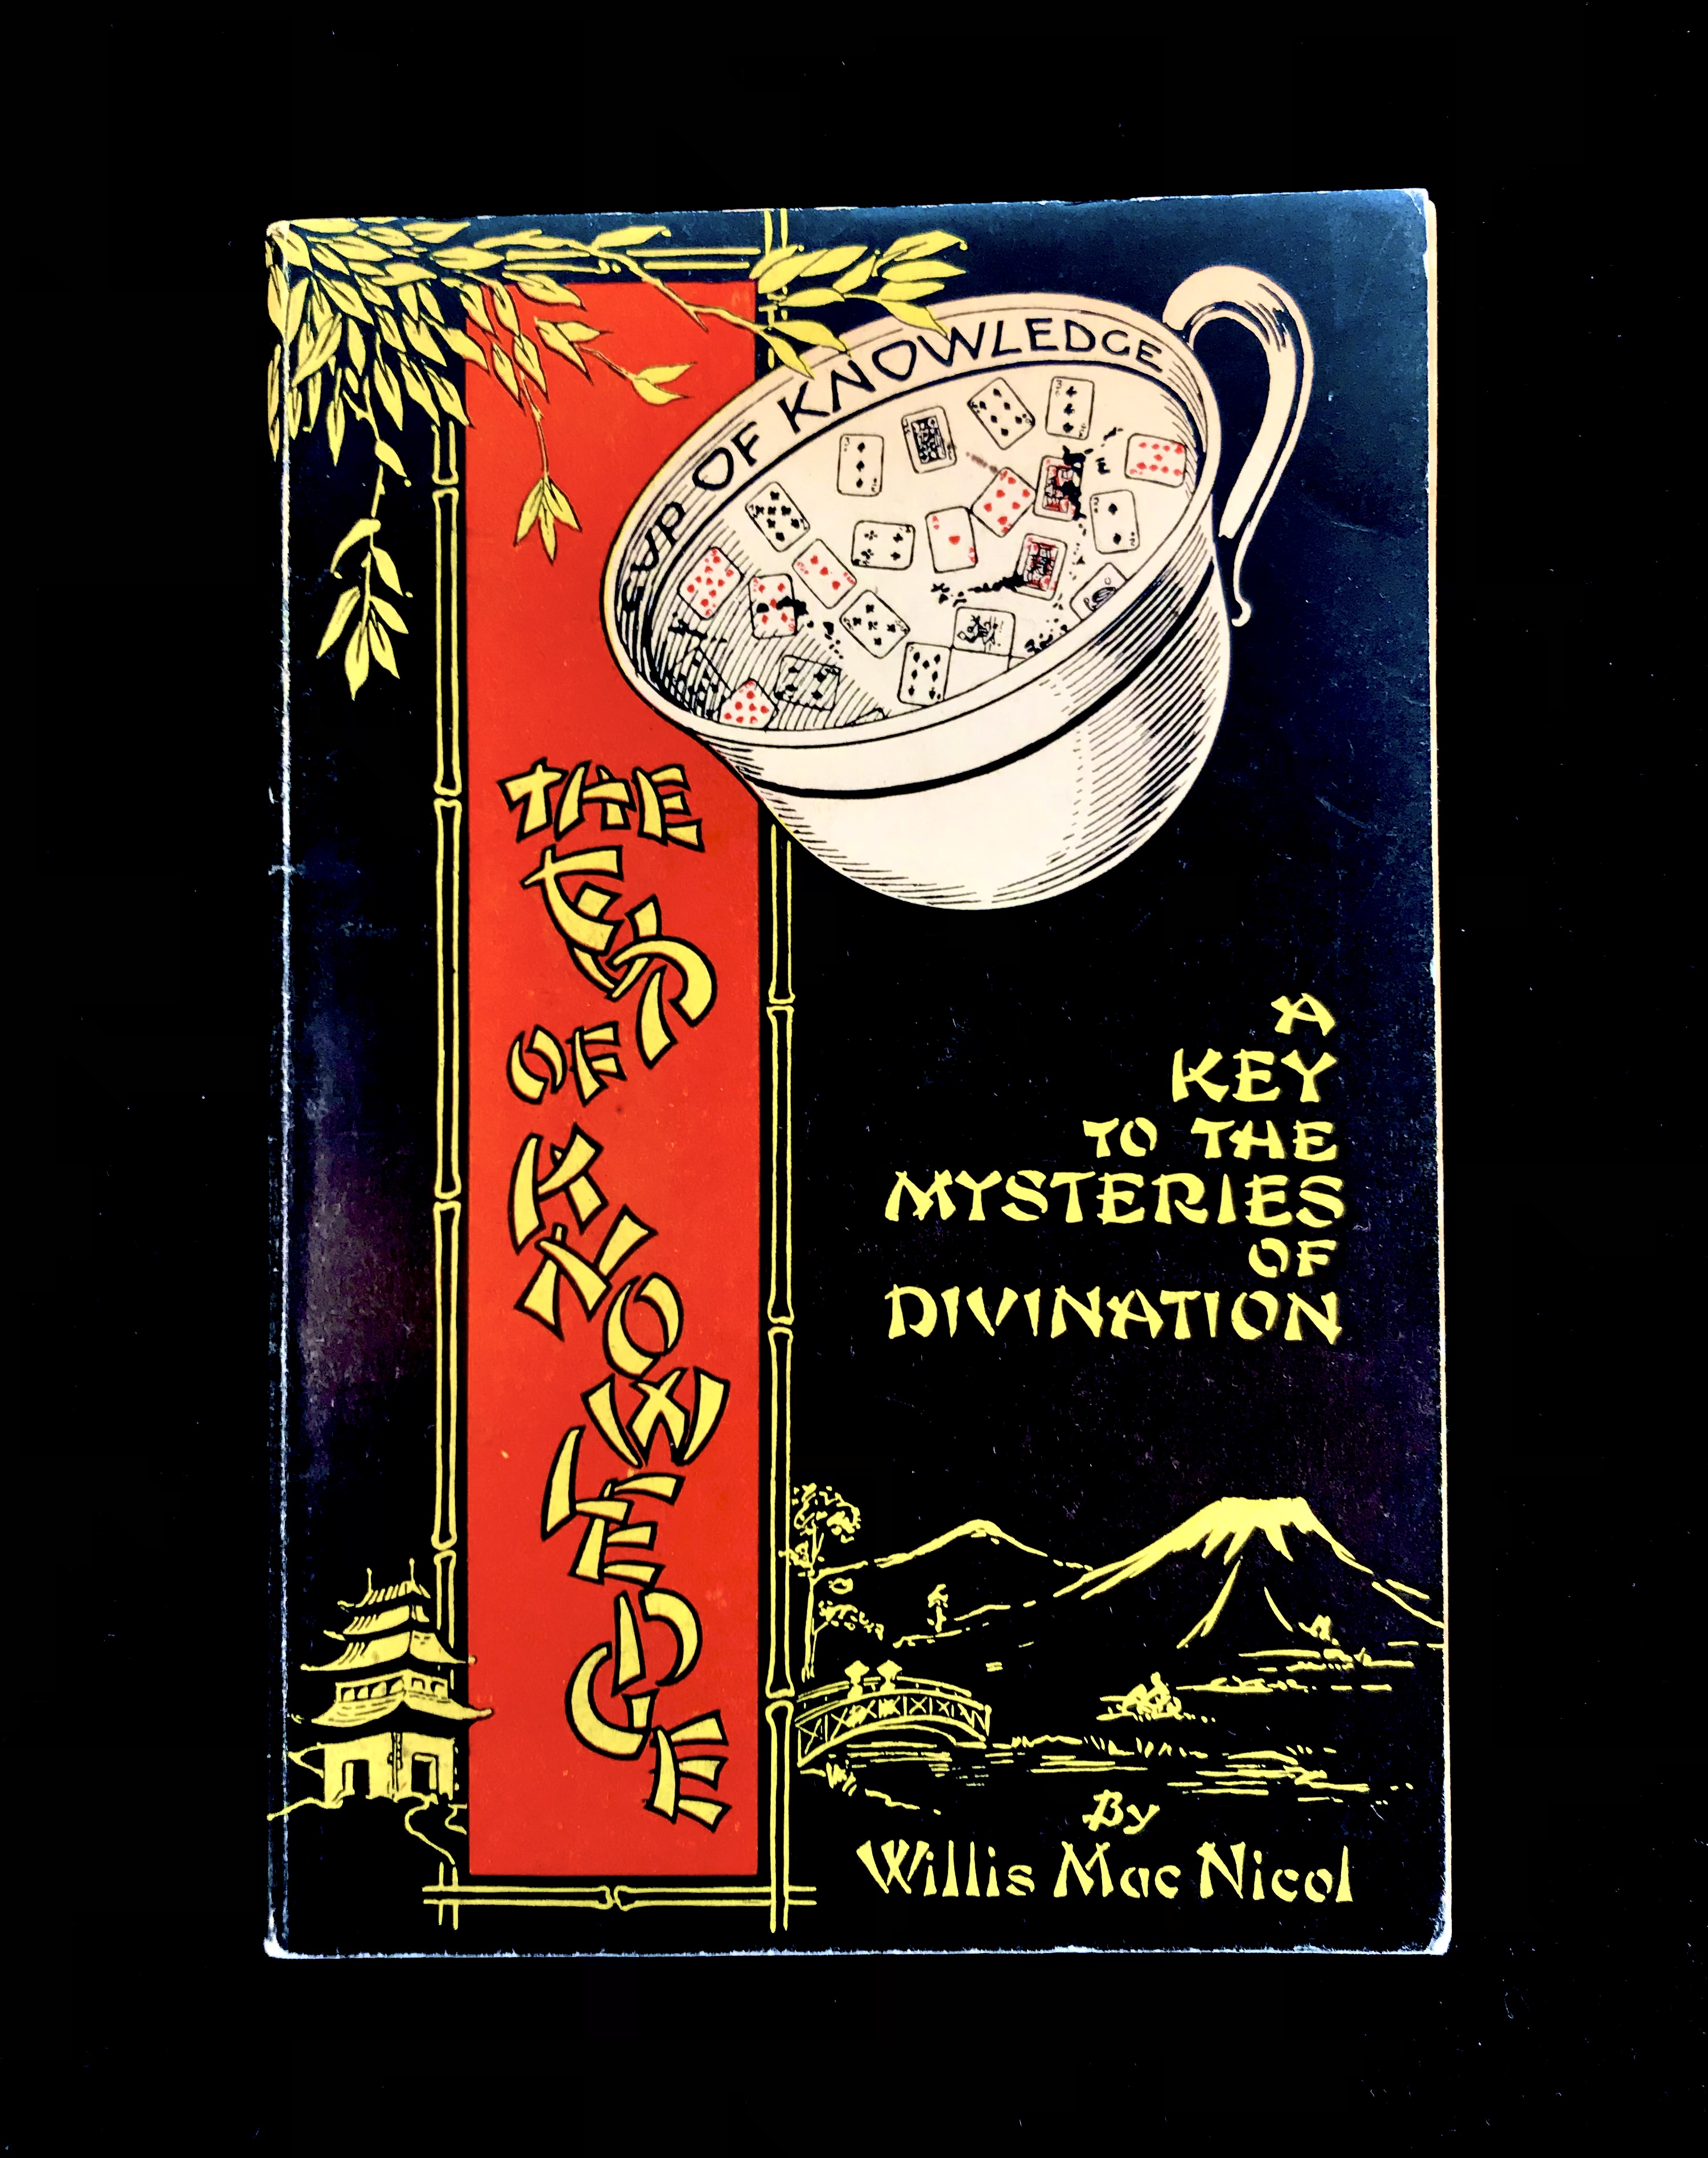 The Cup of Knowledge: A Key To The Mysteries Of Divination by Willis Mac Nicol